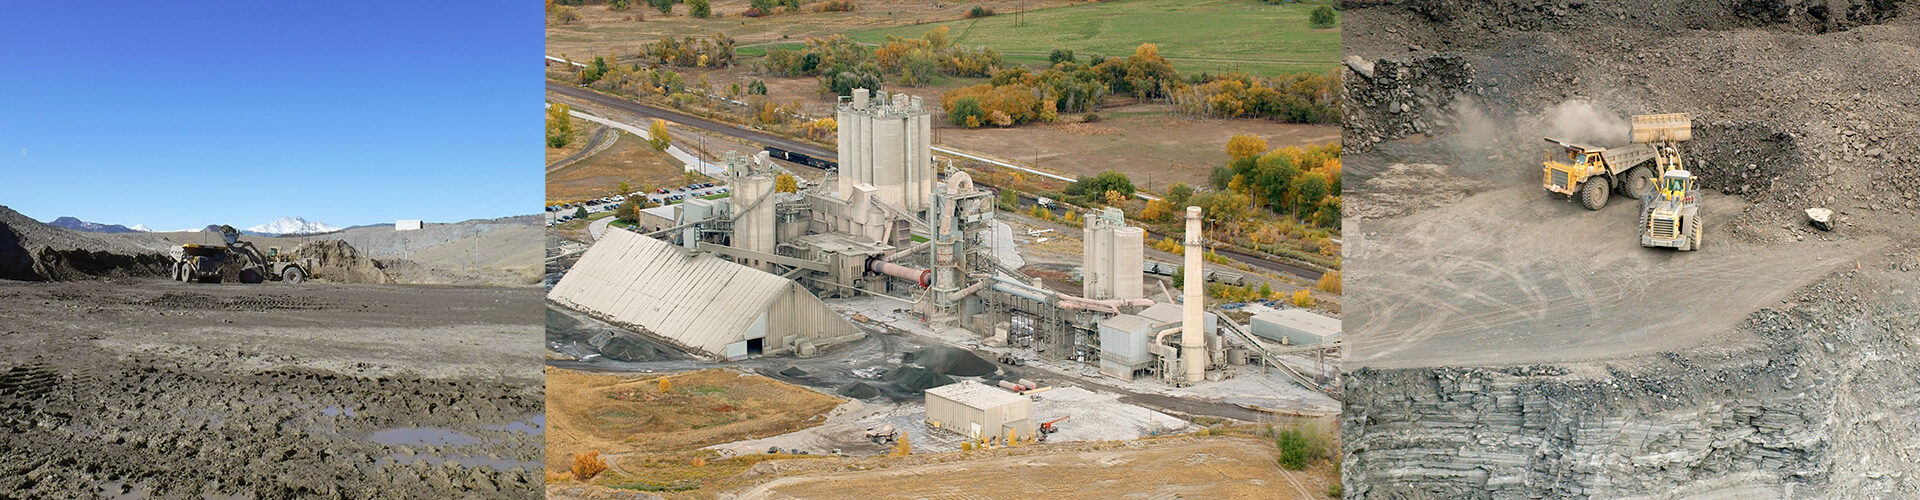 Images of the CEMEX plant and quarry operations featuring heavy equipment, east of Lyons, Colorado.